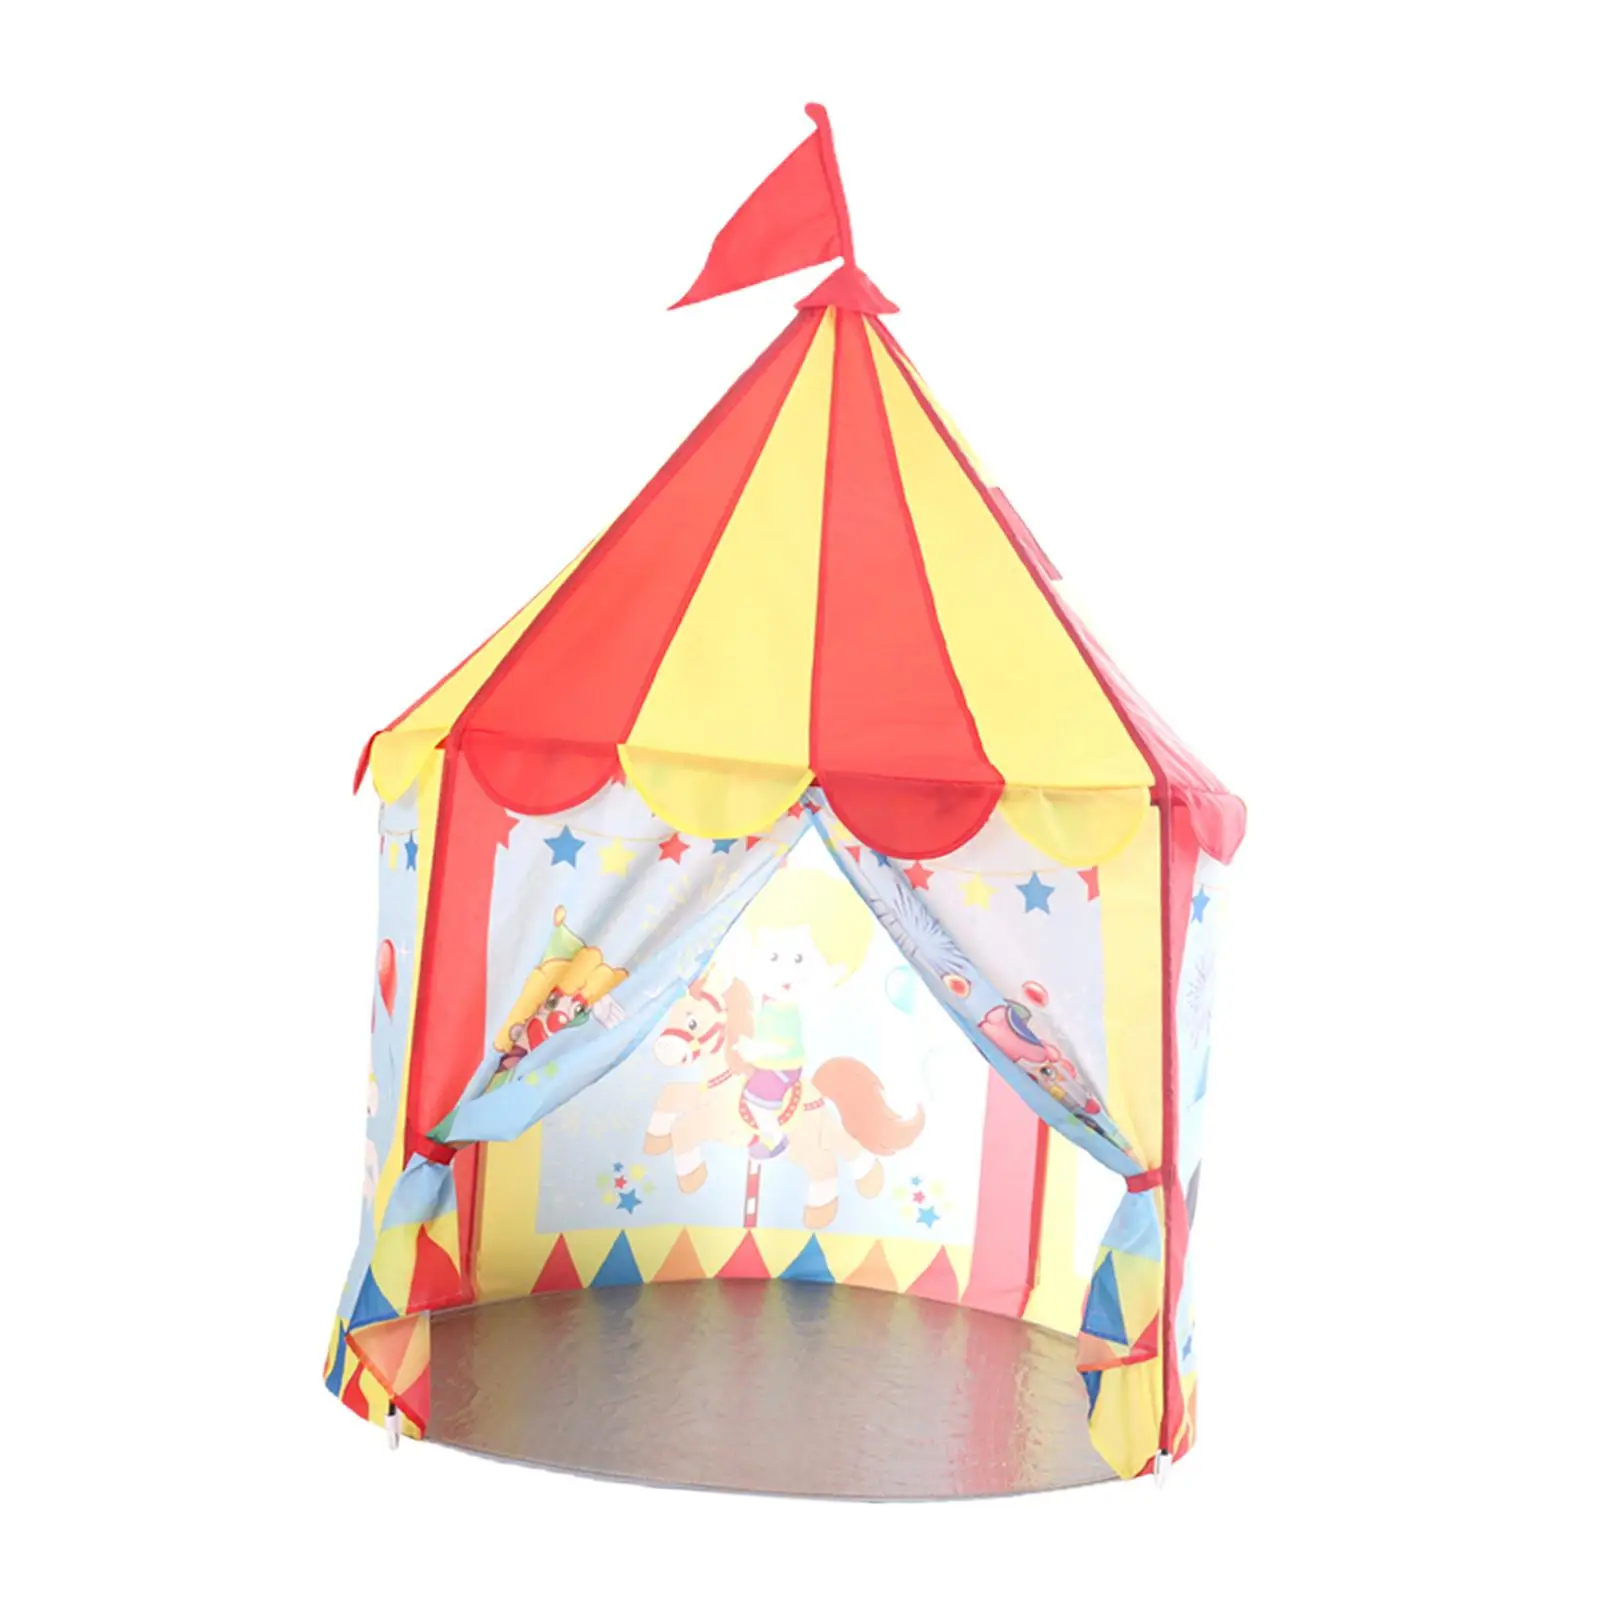 Play Tent Birthday Gift Easy to Assemble for Kids Children Castle Playhous Kids Playhouse for Games Camping Yard Garden Children